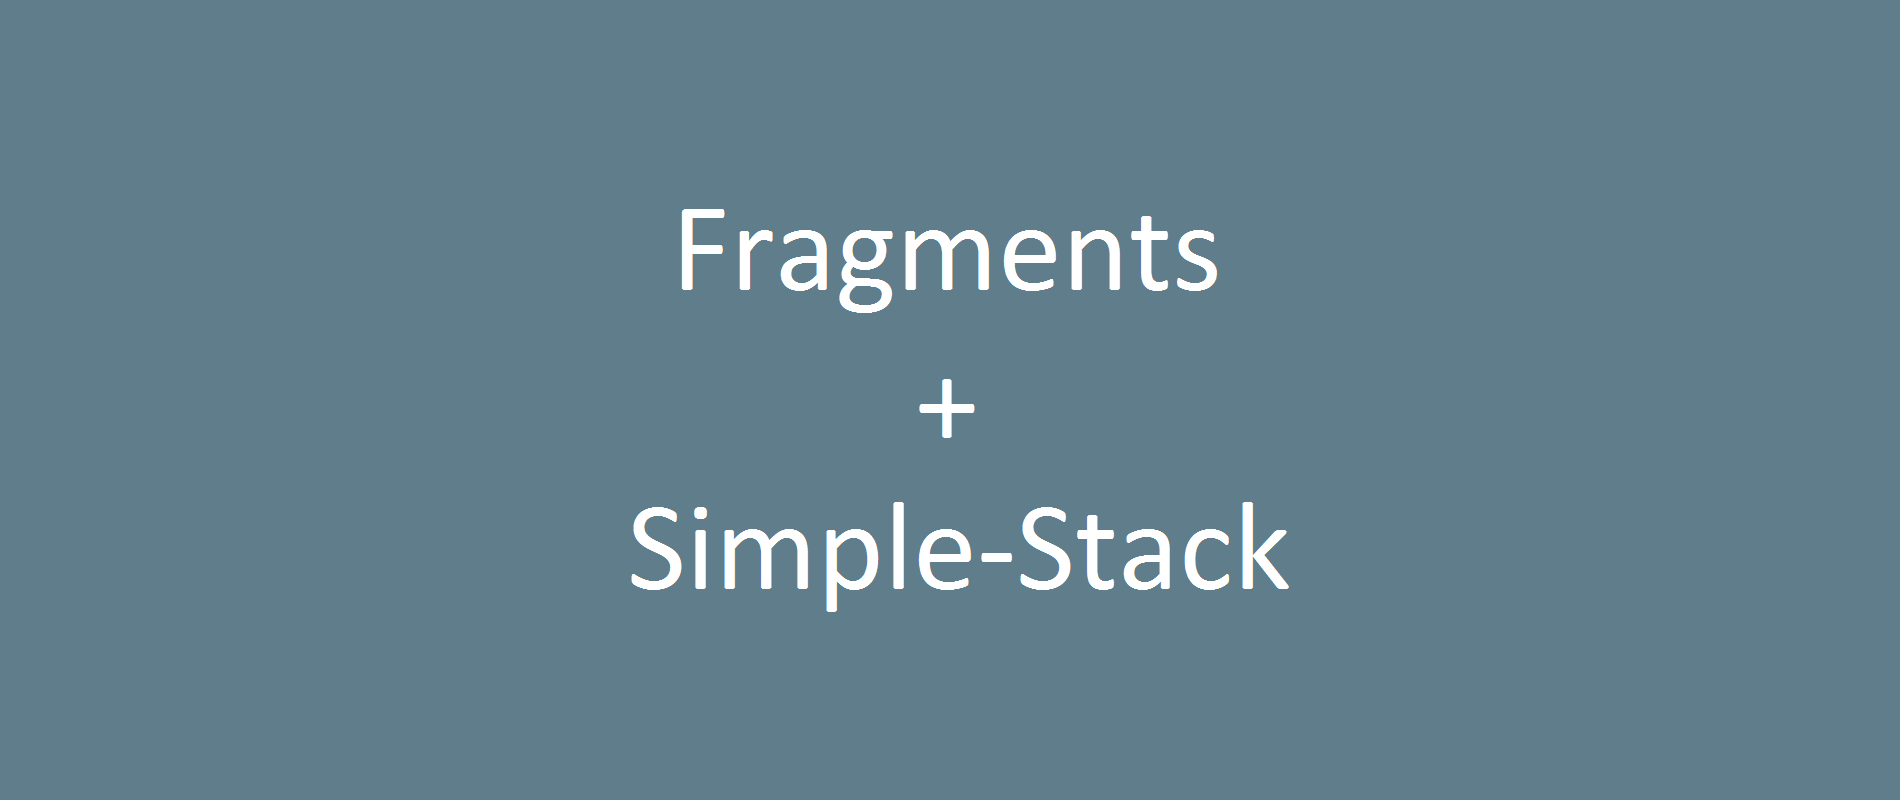 Simplified Fragment Navigation, using a custom backstack and